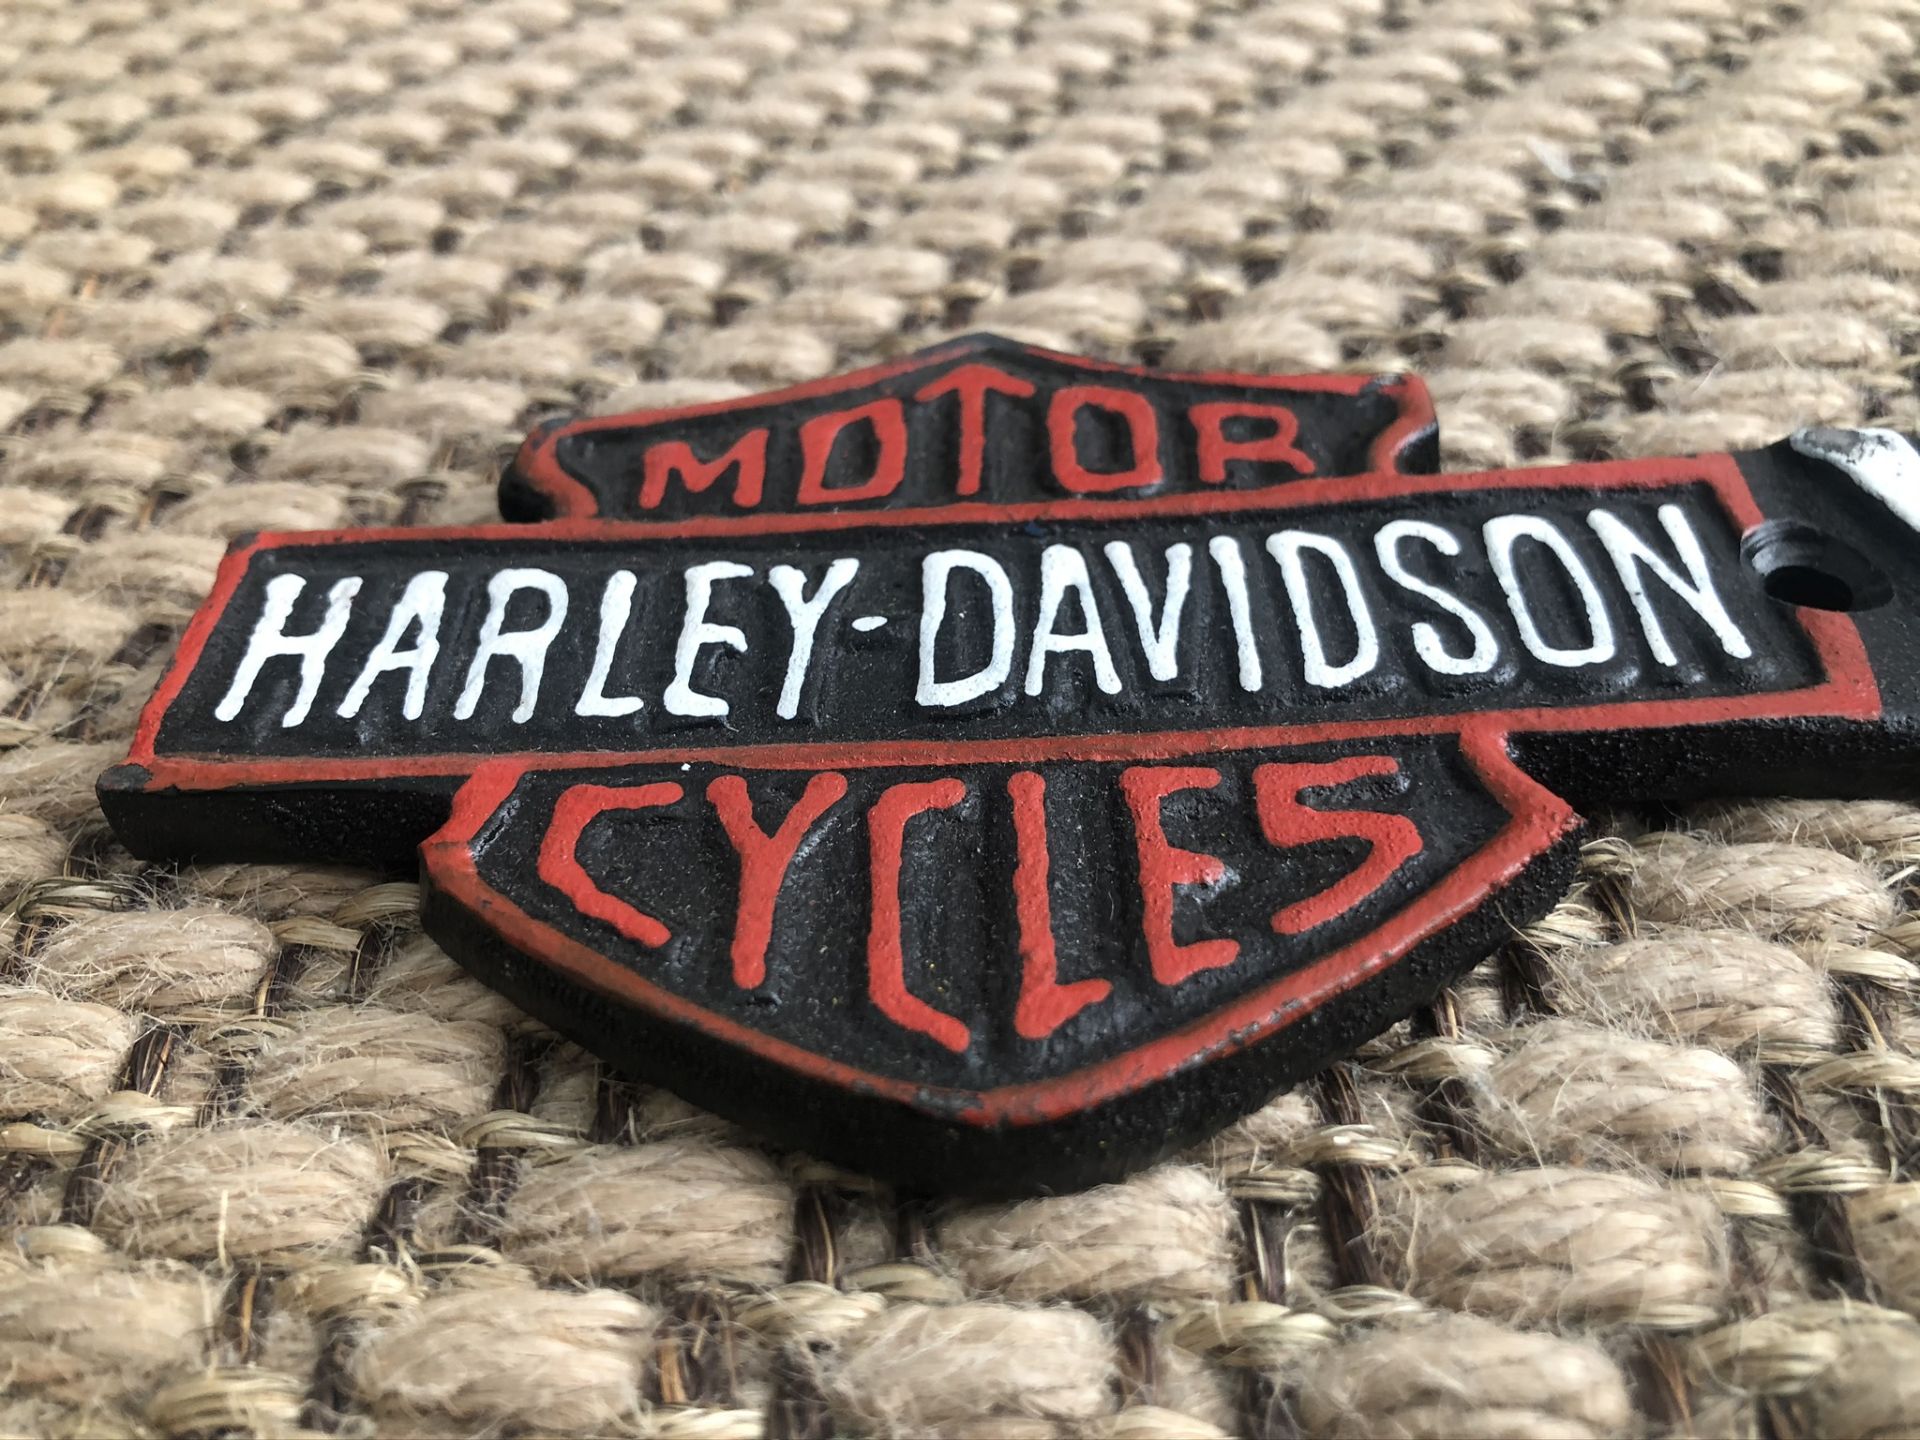 Cast Iron Harley Davidson Motorcycles Garage Arrow Wall Plaque - Image 2 of 5